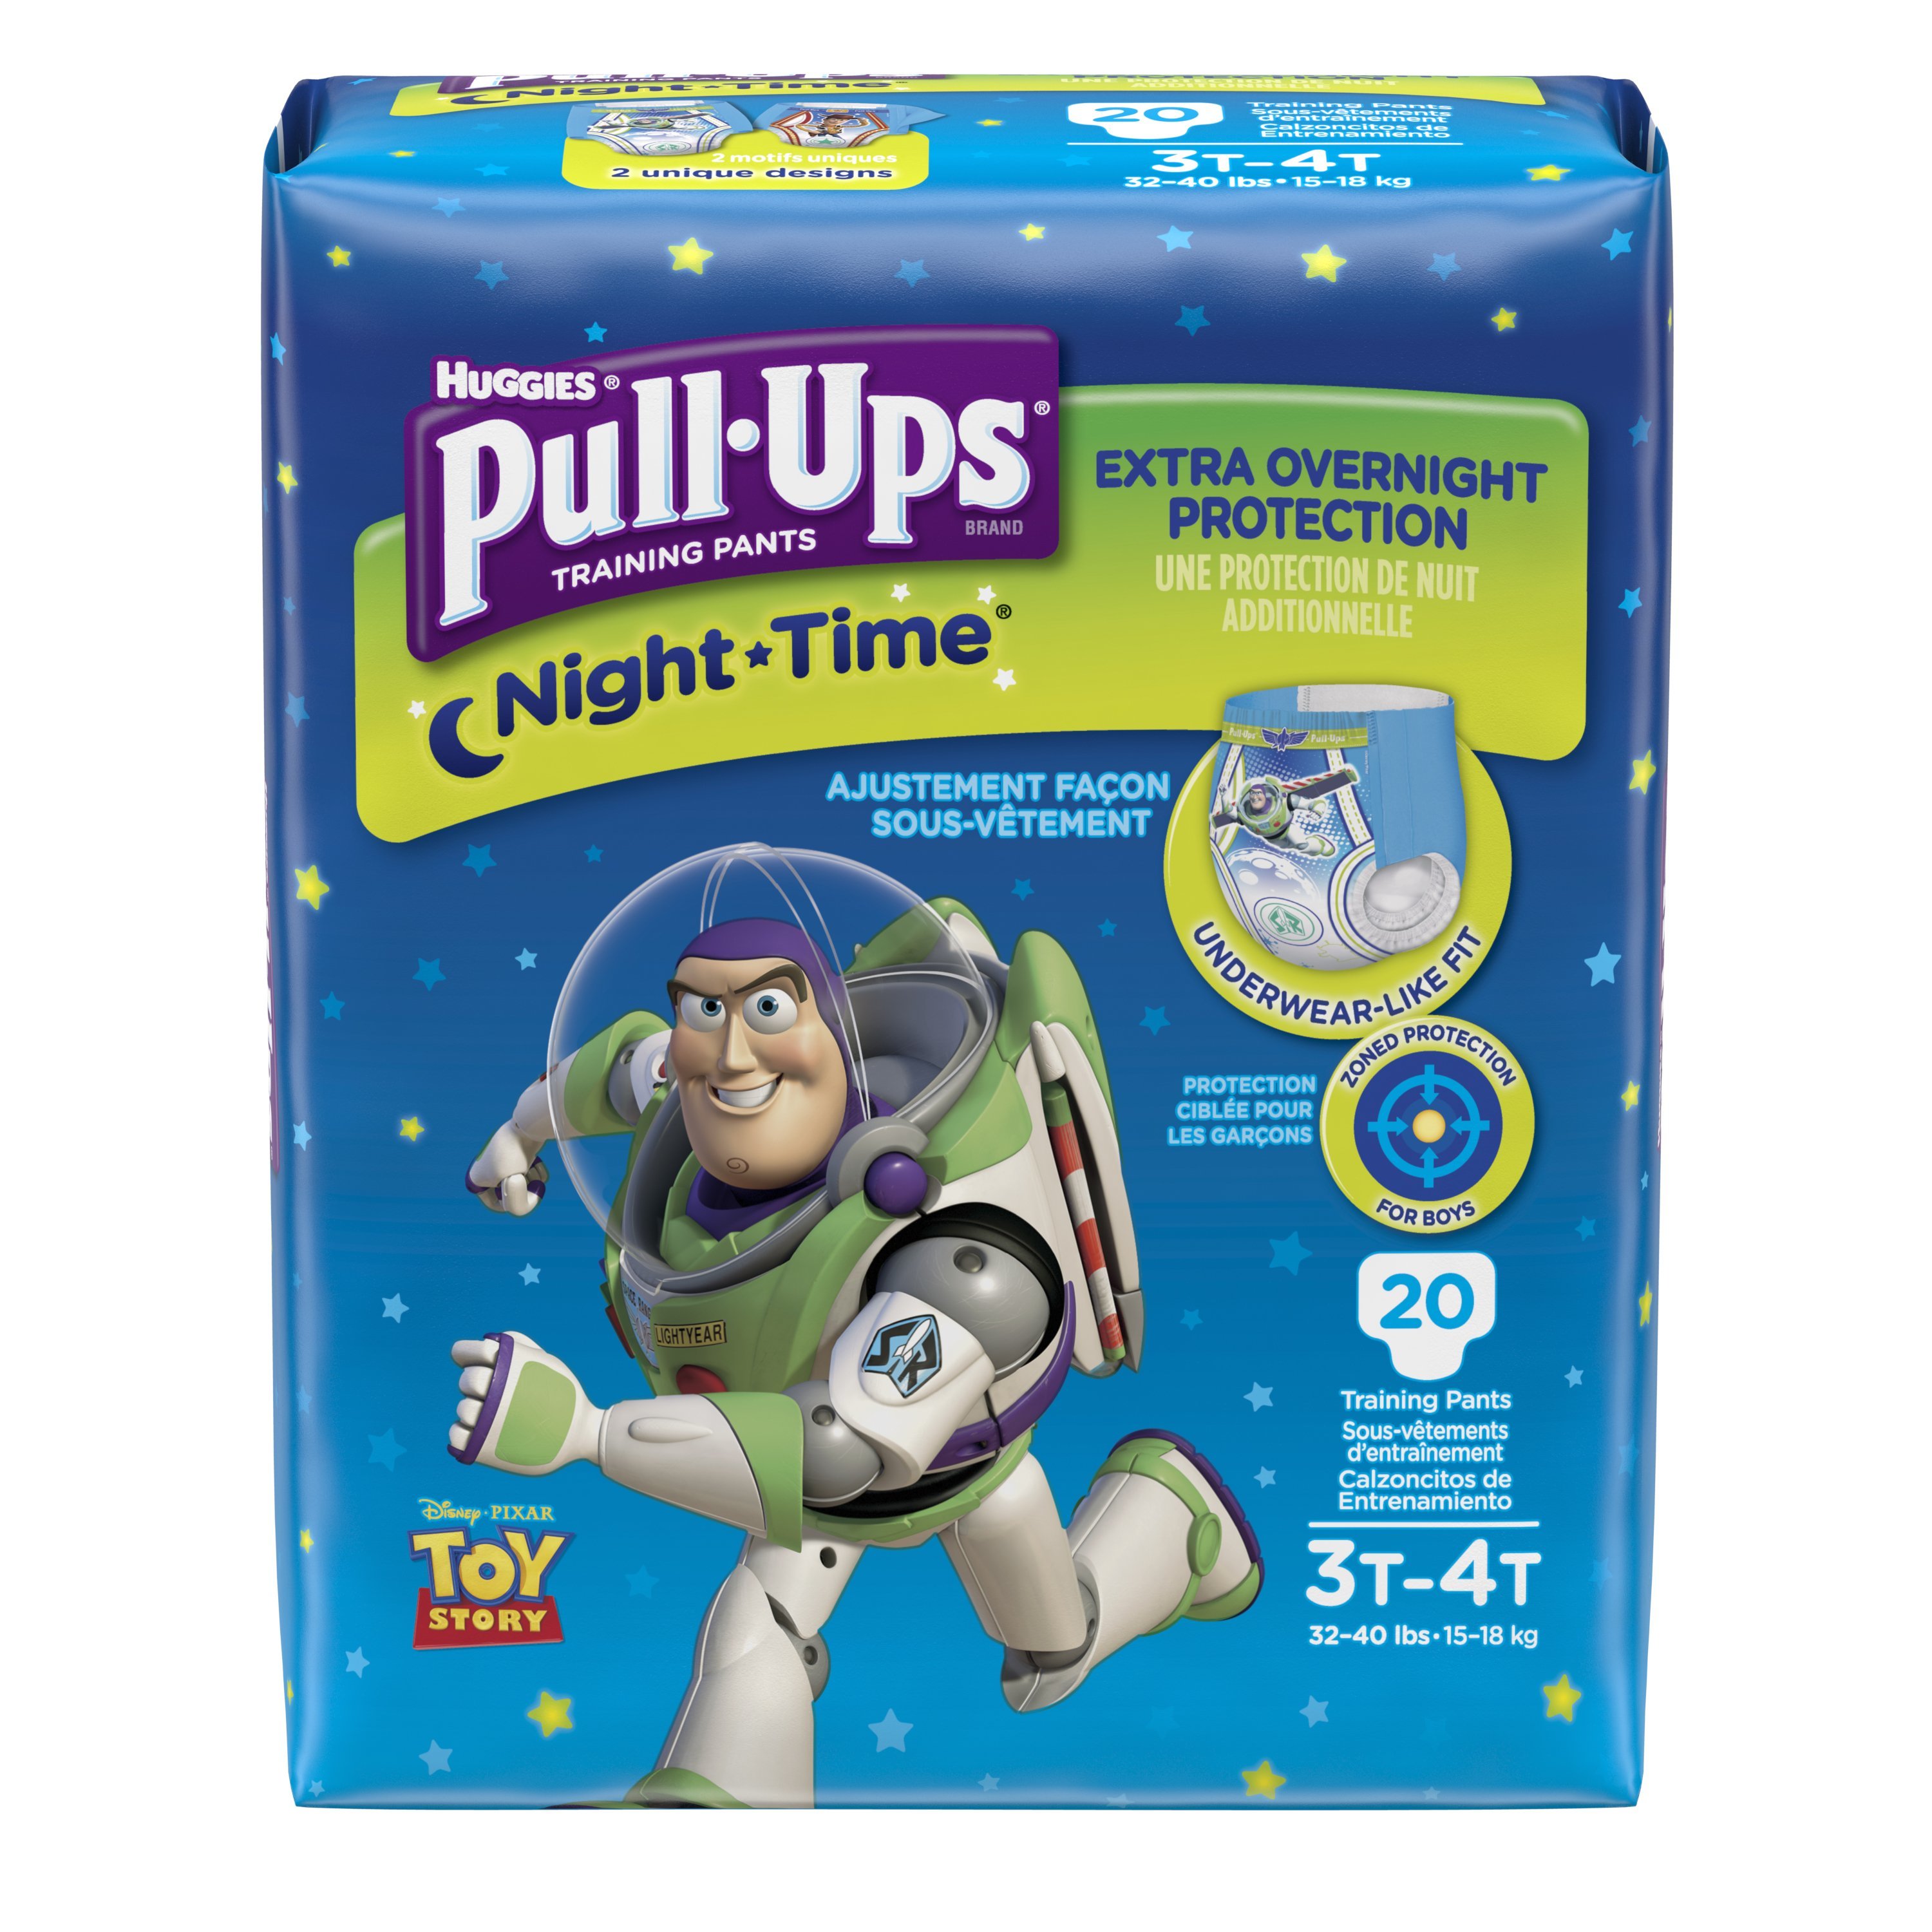 Pull-Ups Night-Time Potty Training Pants for Boys, 3T-4T (32-40 lb.), 20 Ct. (Packaging May Vary) - image 1 of 8